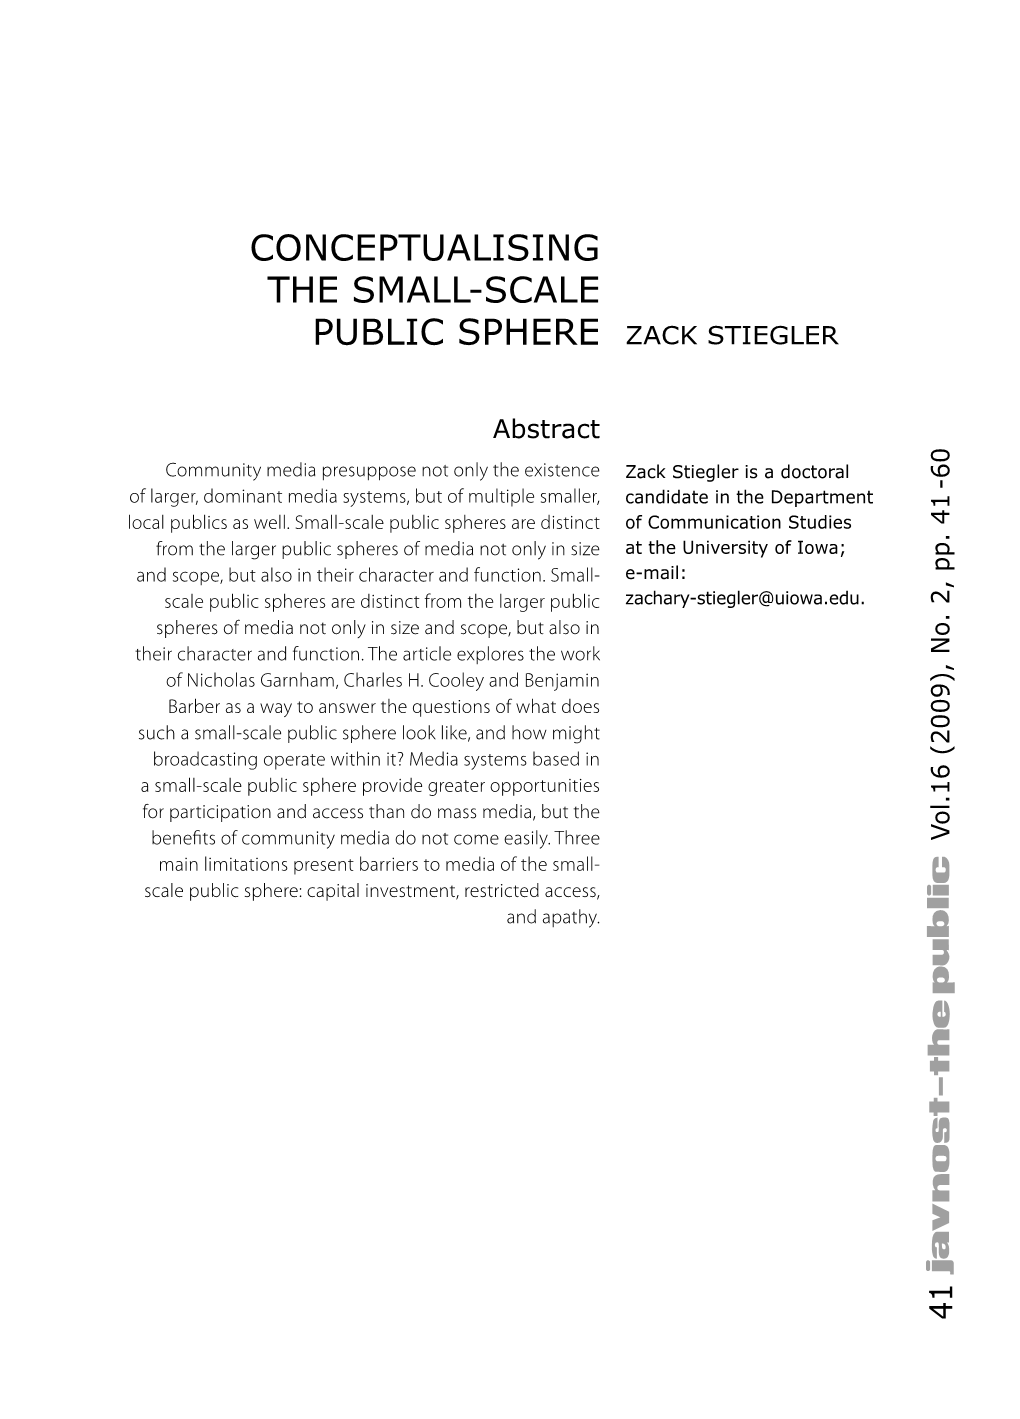 CONCEPTUALISING the SMALL-SCALE PUBLIC SPHERE Abstract and Apathy